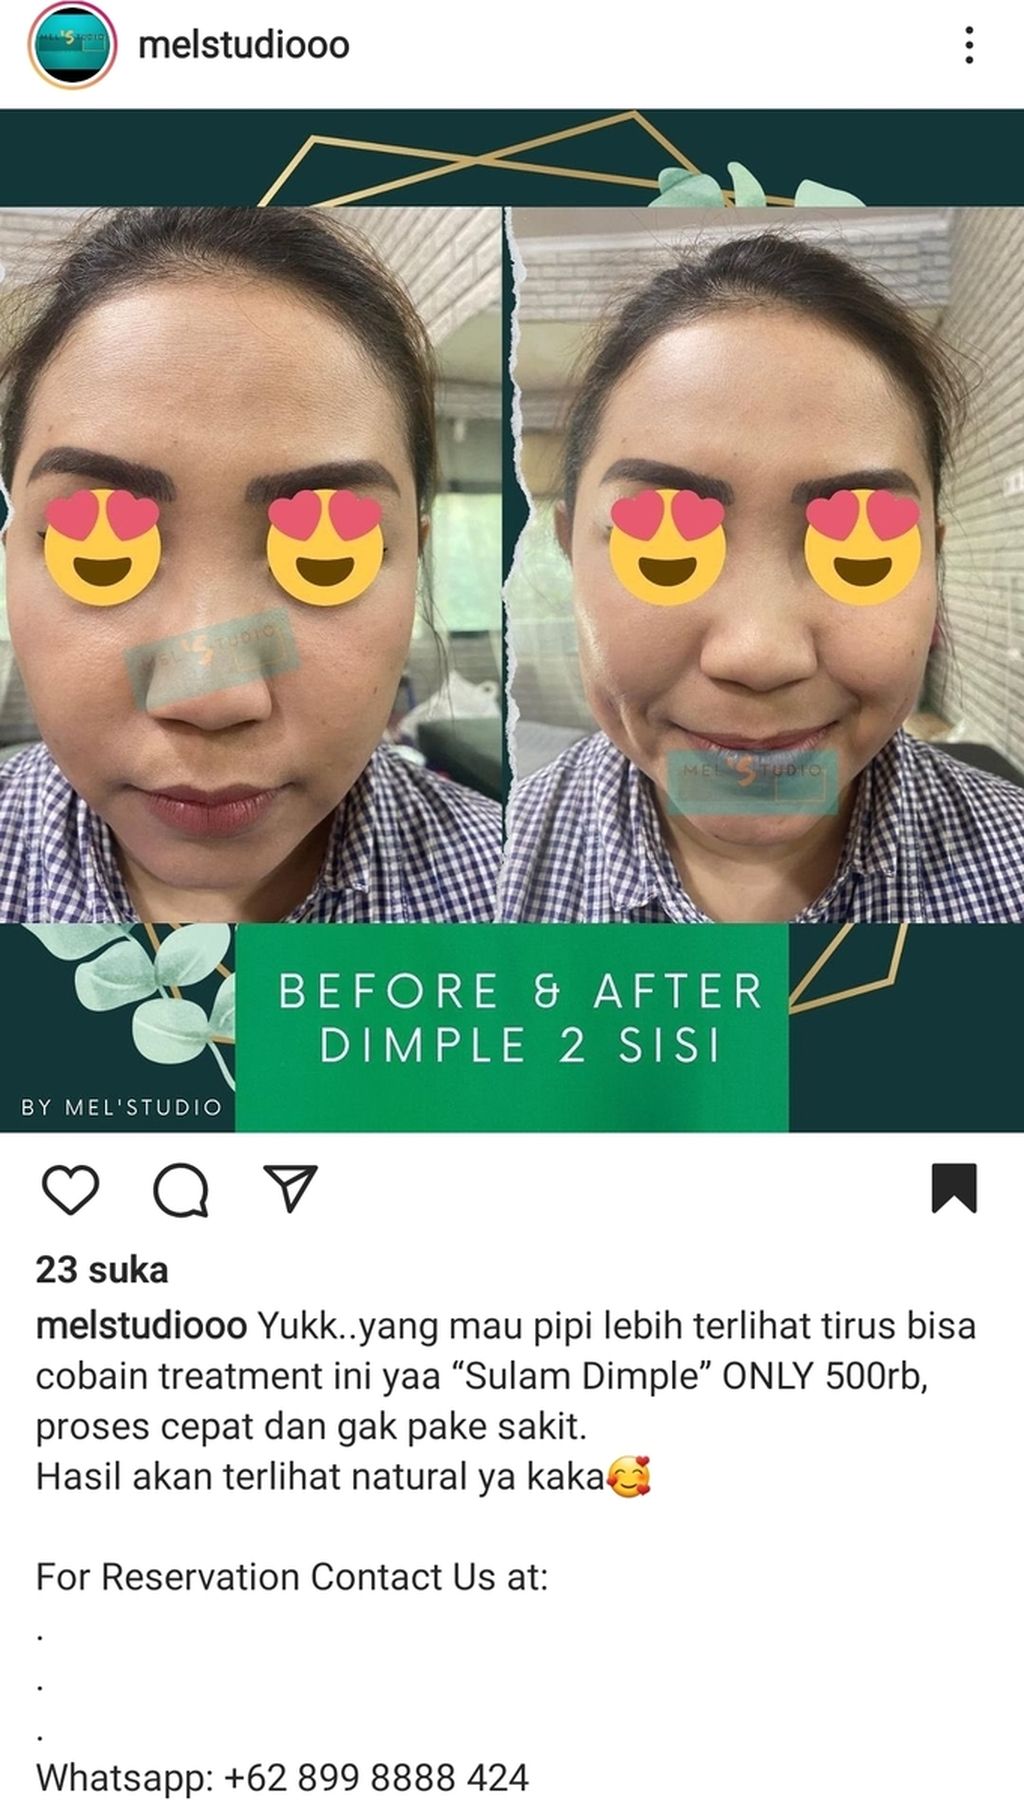 Screenshot on Monday (4/4/2022) of the upload of the dimple embroidery promotion on the Instagram account @melstudiooo. The account belongs to the beauty studio Melstudio, which is located on Jalan Raya Jatiwaringin, Pondok Gede, Bekasi City, West Java.